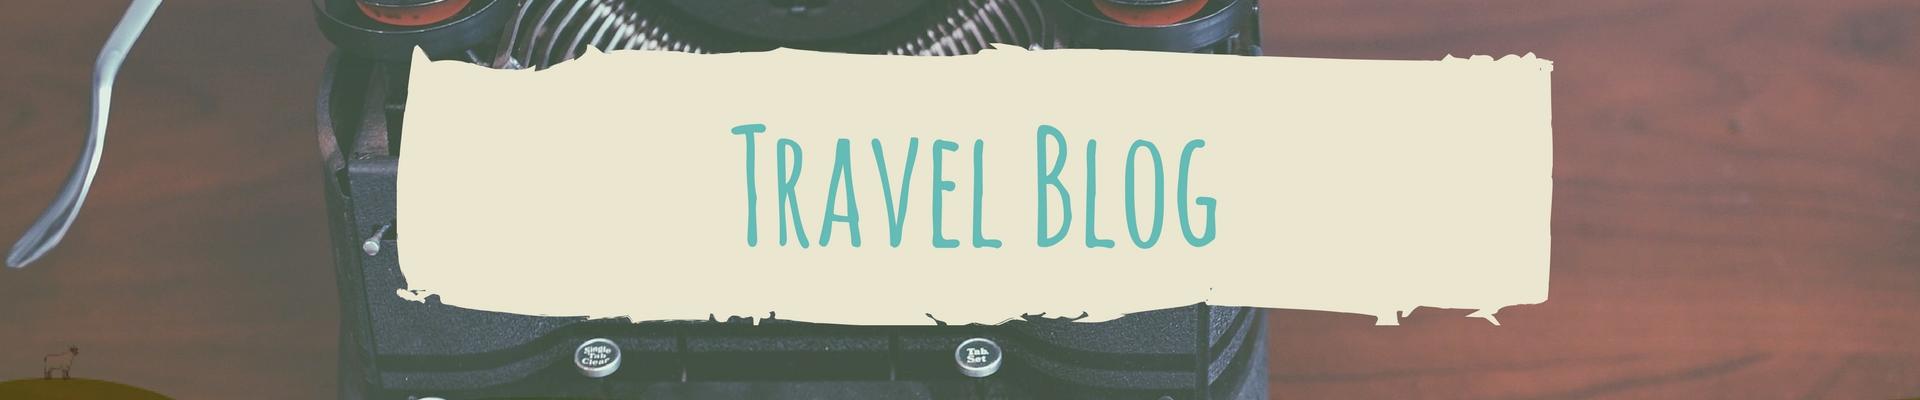 Two Travel The World - Travel Blog